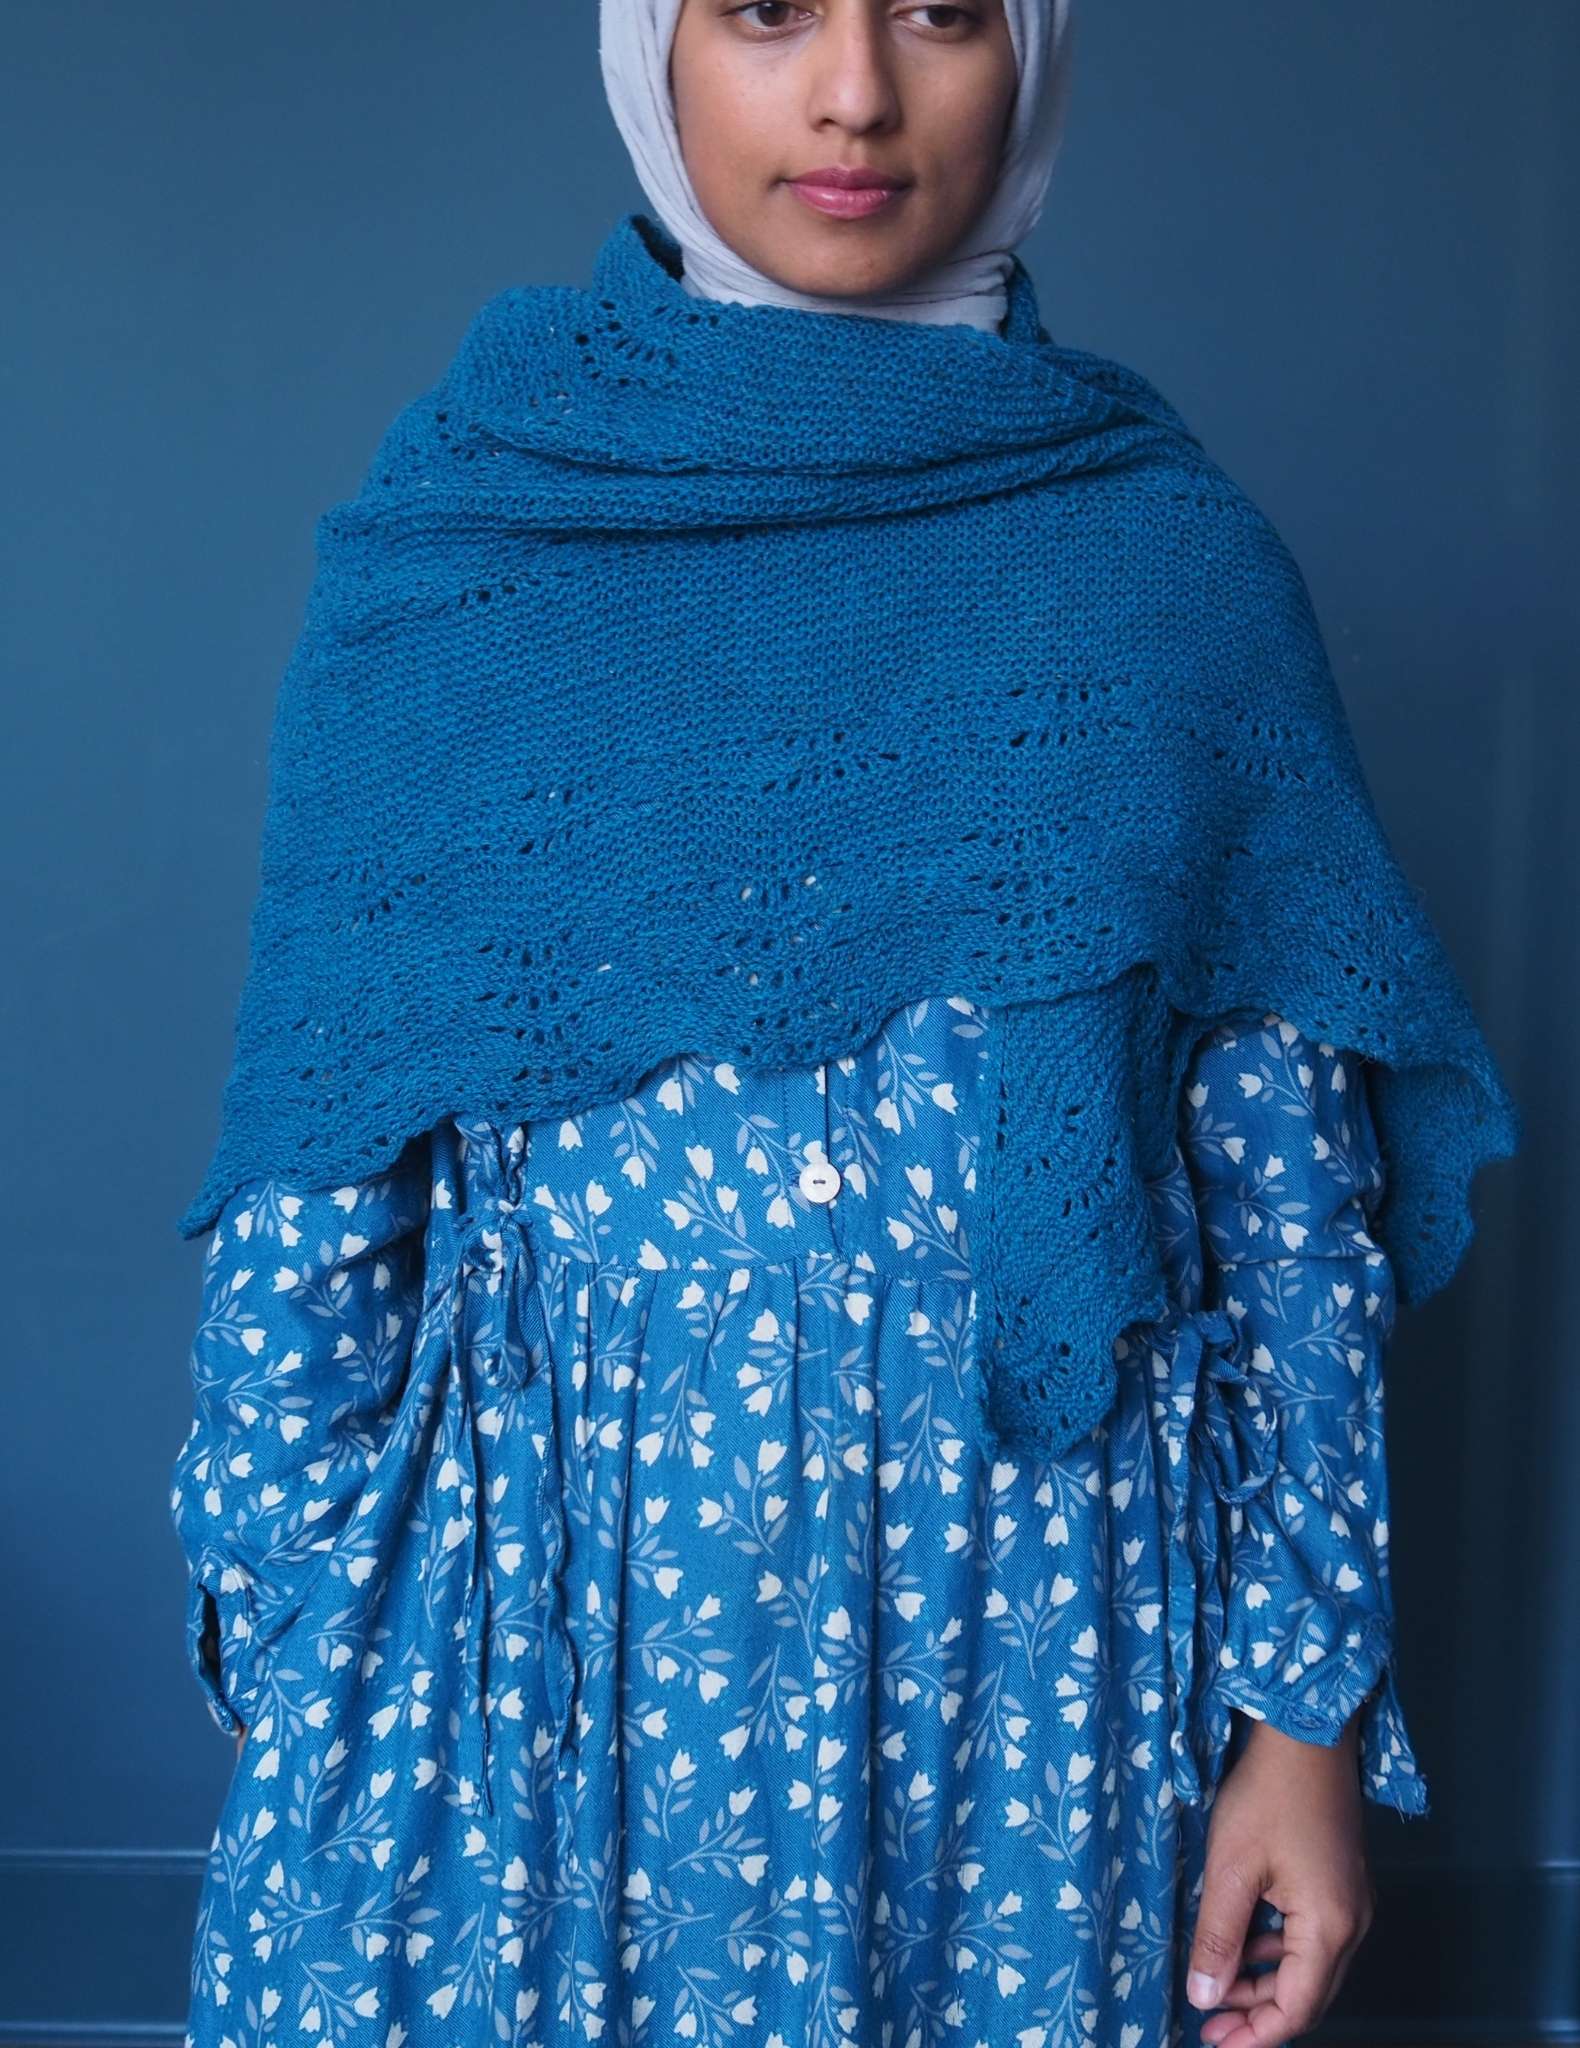 A brown woman in a hijab stands in front of a dark blue background. She is wearing a blue dress with small white floral print and a dark blue shawl which is wrapped around her chest and shoulders.